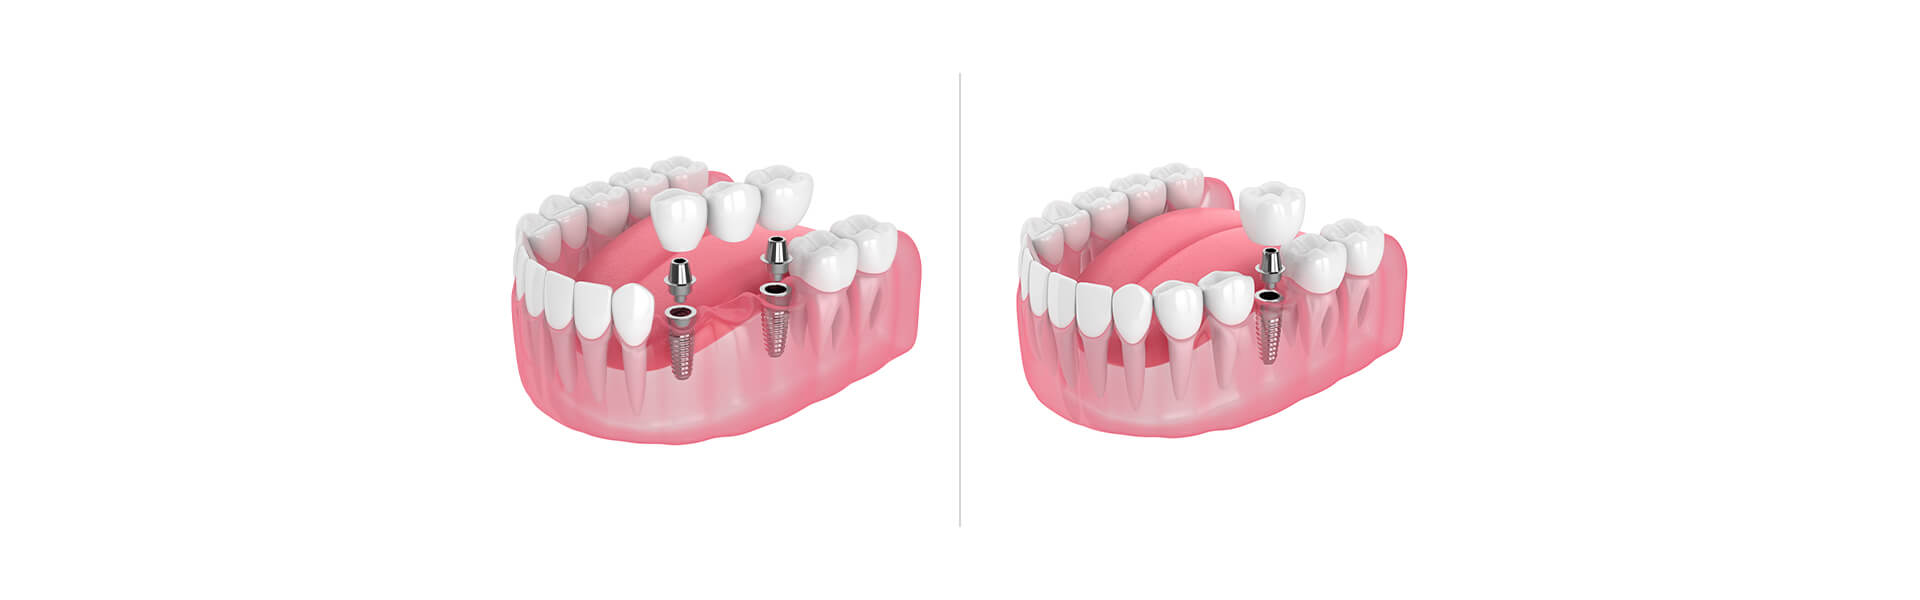 Dental Bridges Vs. Implants: Which One is the Best for You?